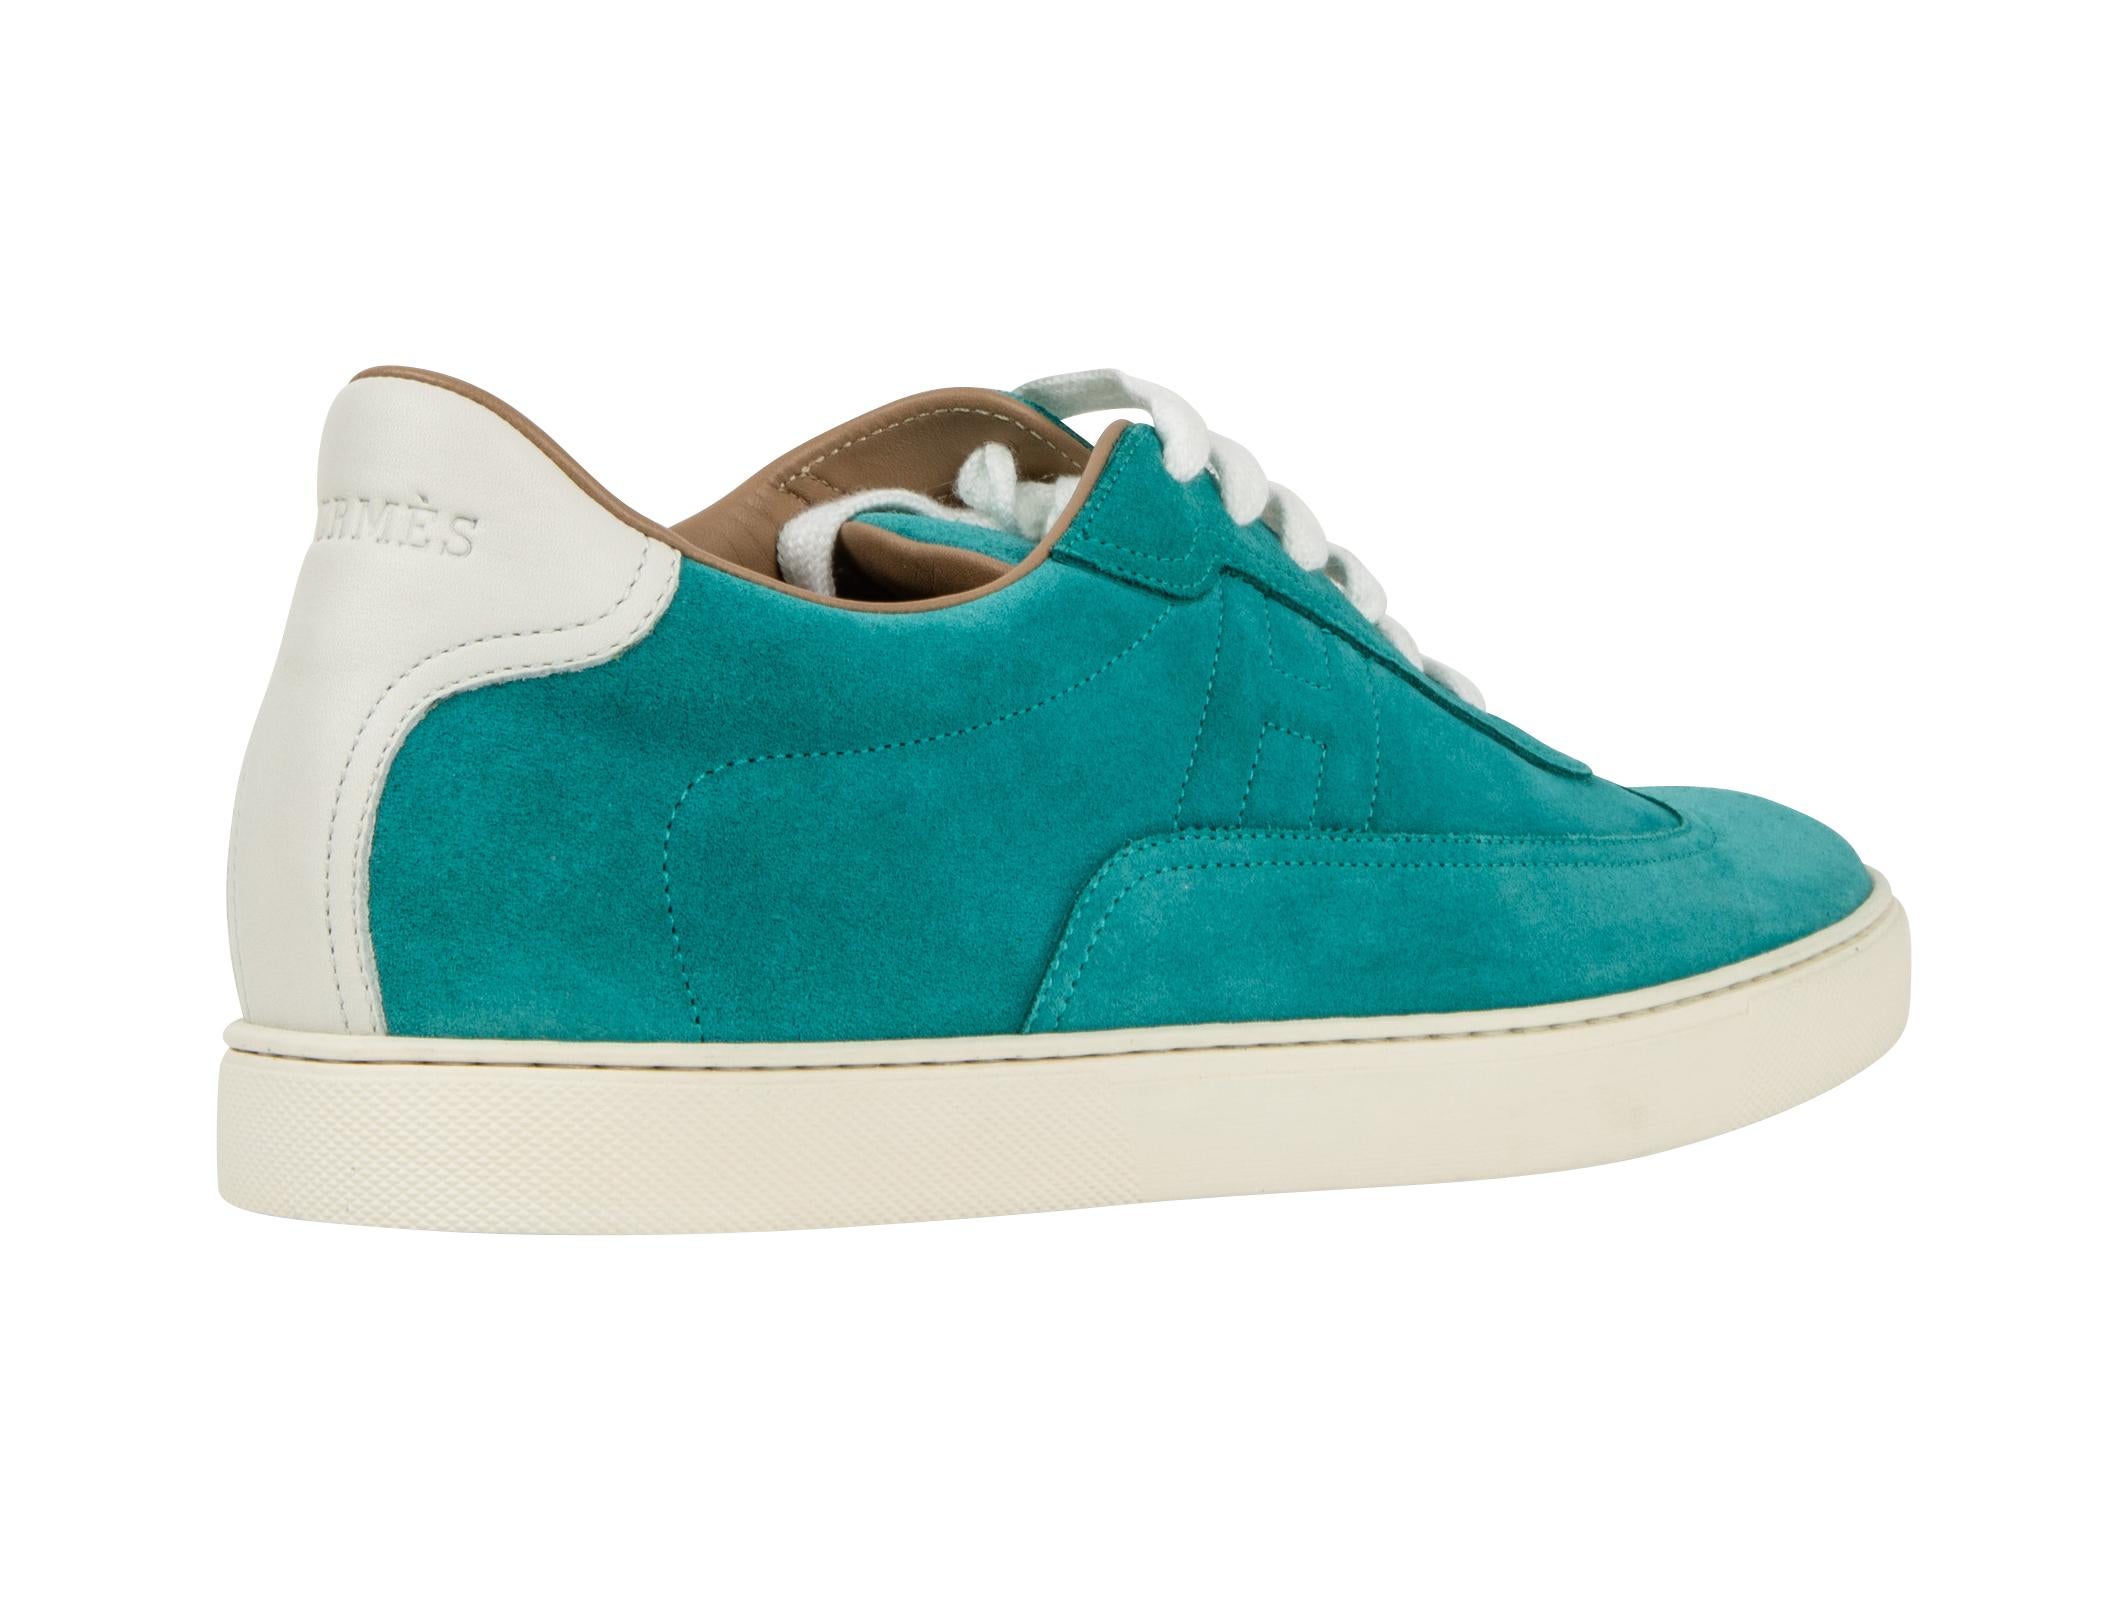 Hermes Shoe Men's Sneaker Blue Paon and White Suede  42.5 1